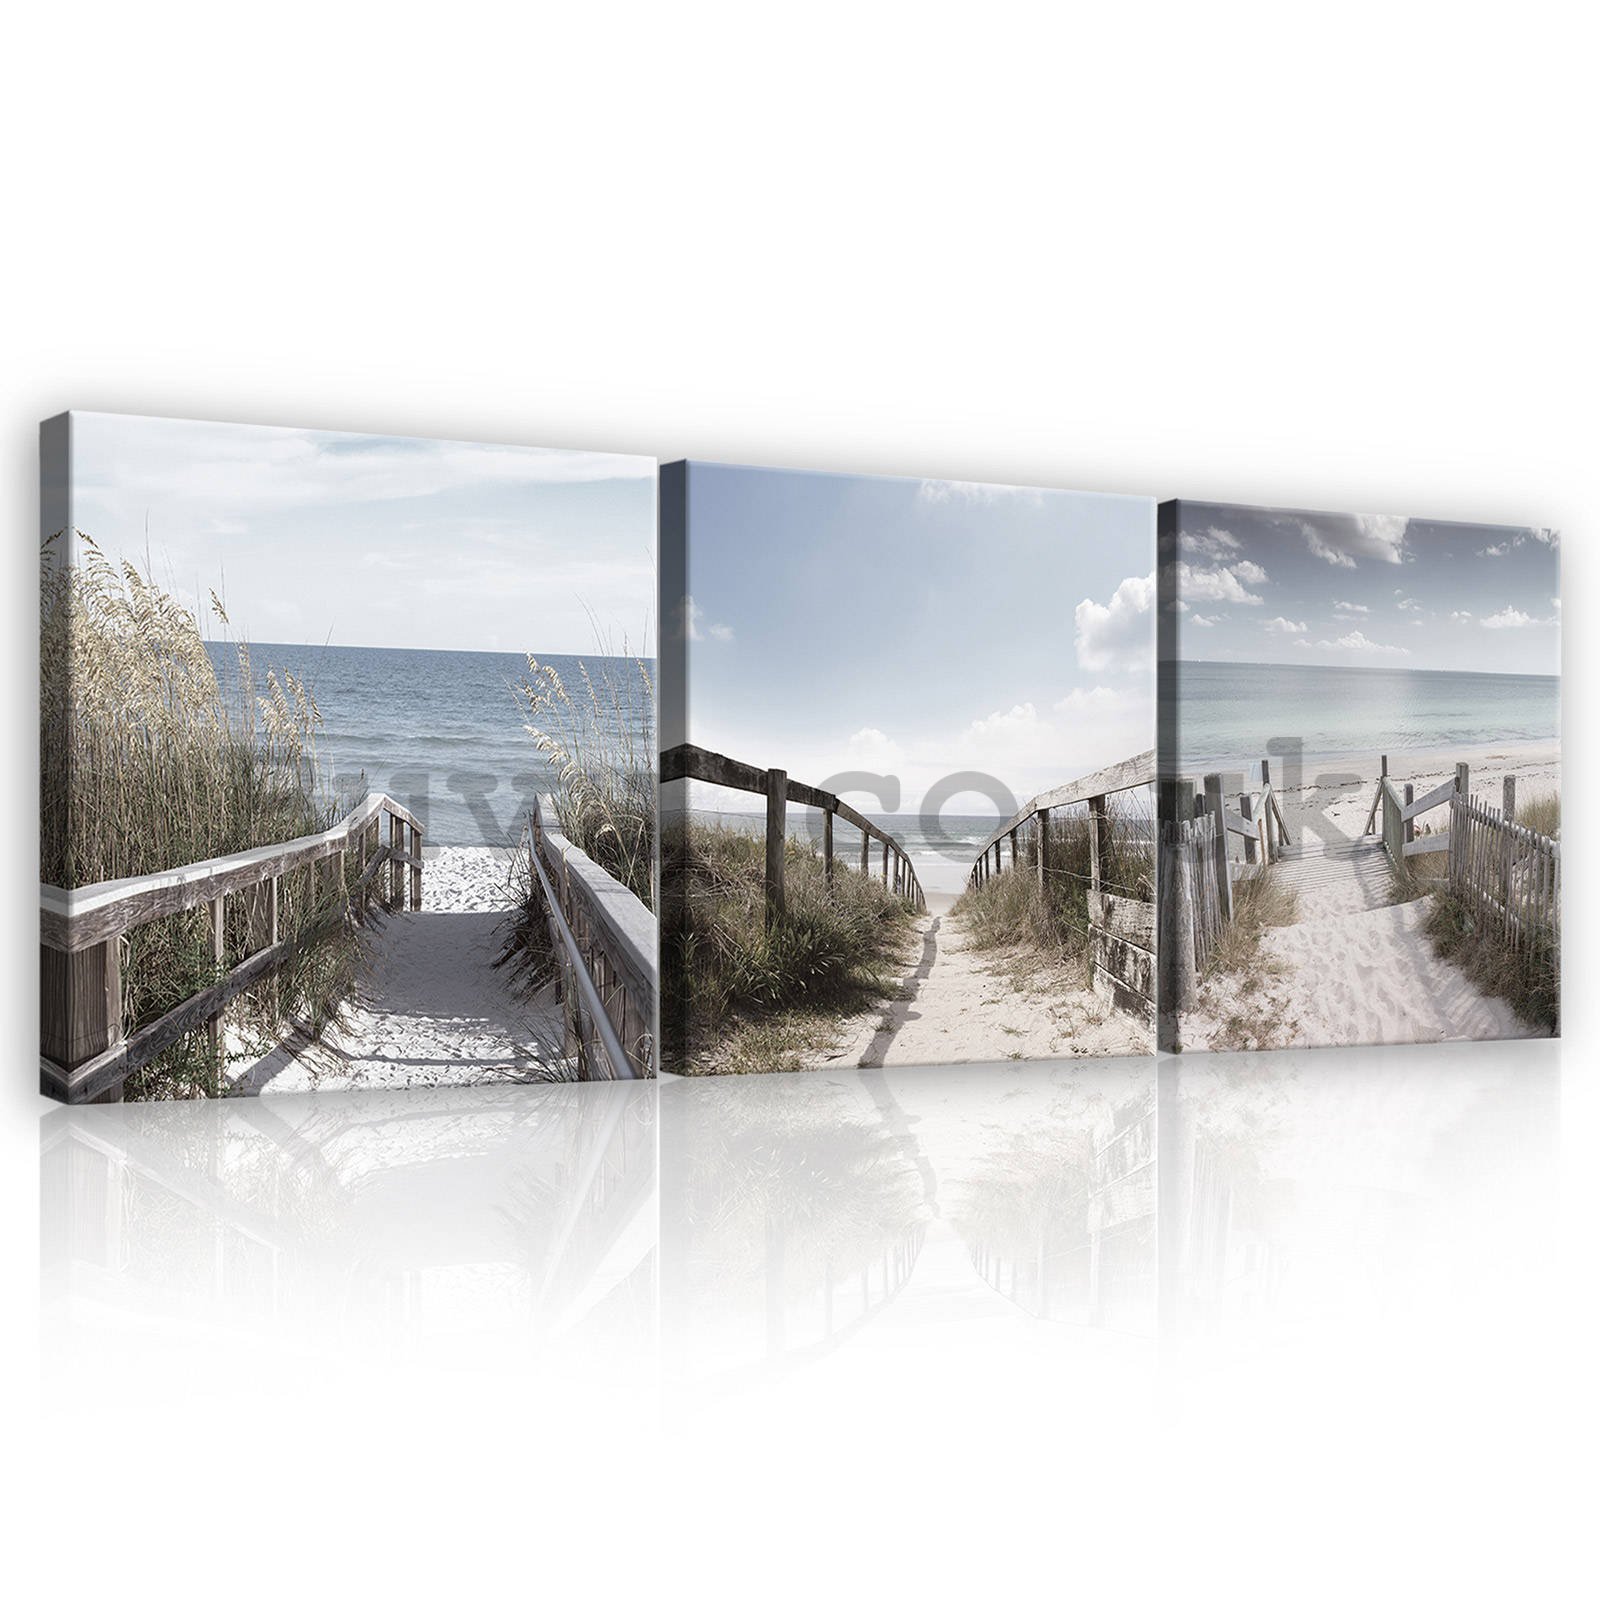 Painting on canvas: Road to the sea - set 3pcs 25x25cm